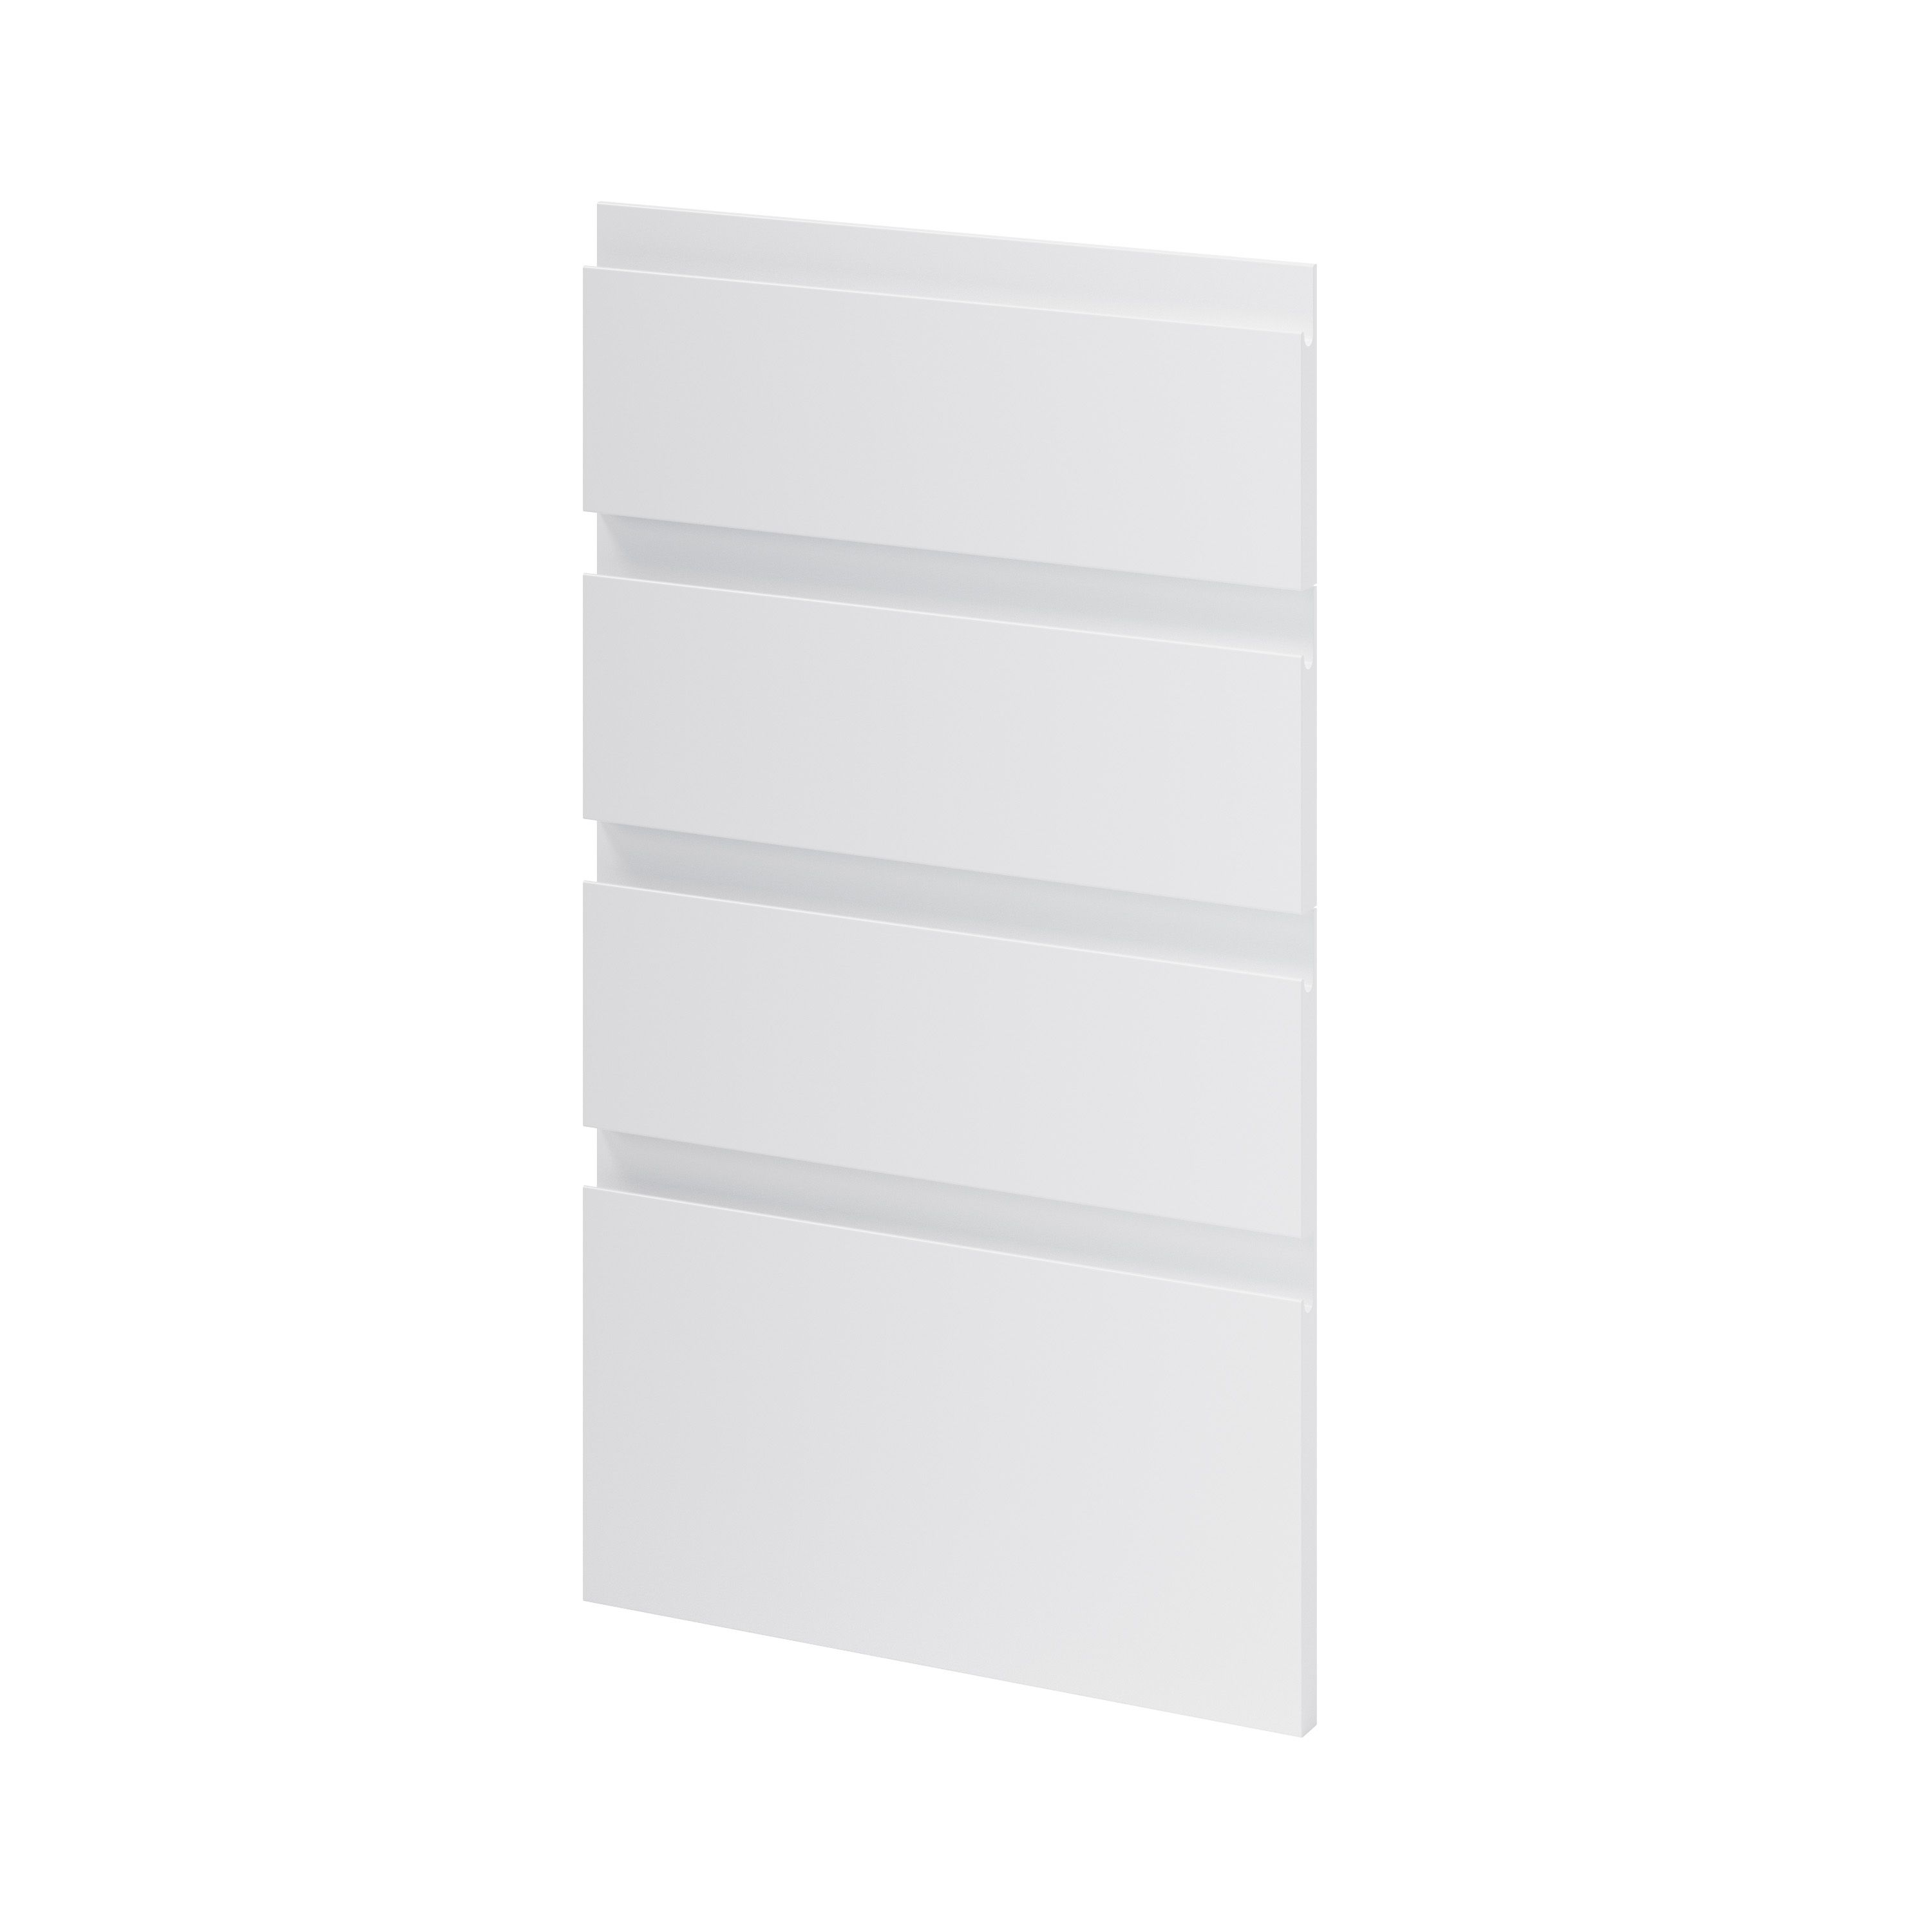 GoodHome Garcinia Gloss light grey integrated handle Drawer front (W)400mm, Pack of 4